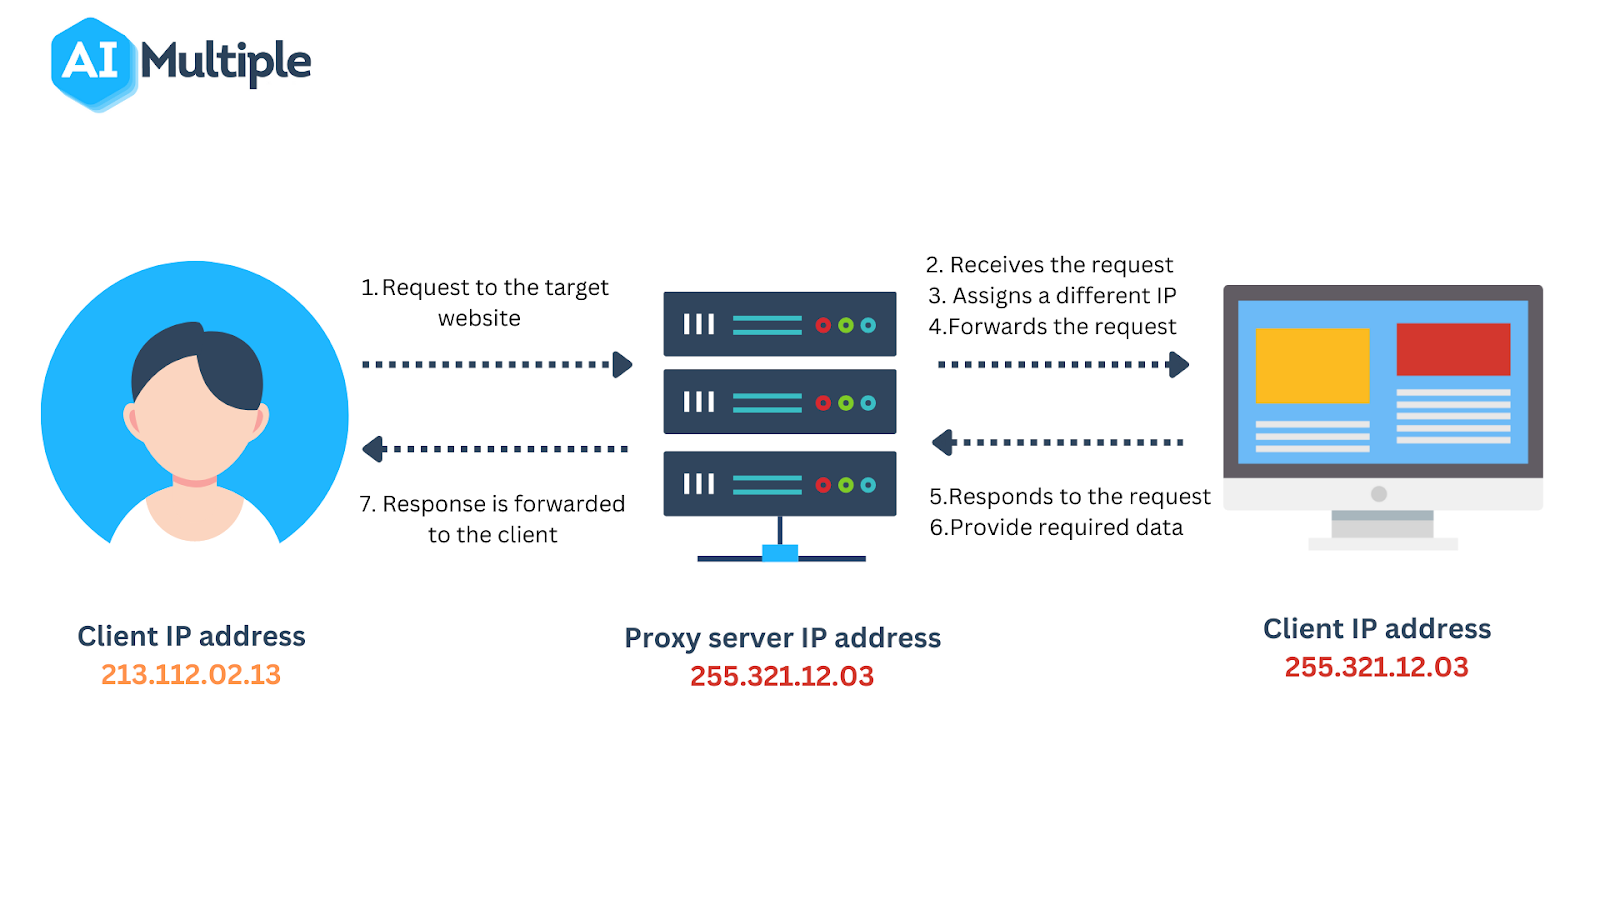 The diagram illustrating the proxy workflow, in which a user's request is routed through the proxy server, which then retrieves the requested content from the target website and returns it to the user while concealing the user's IP address.